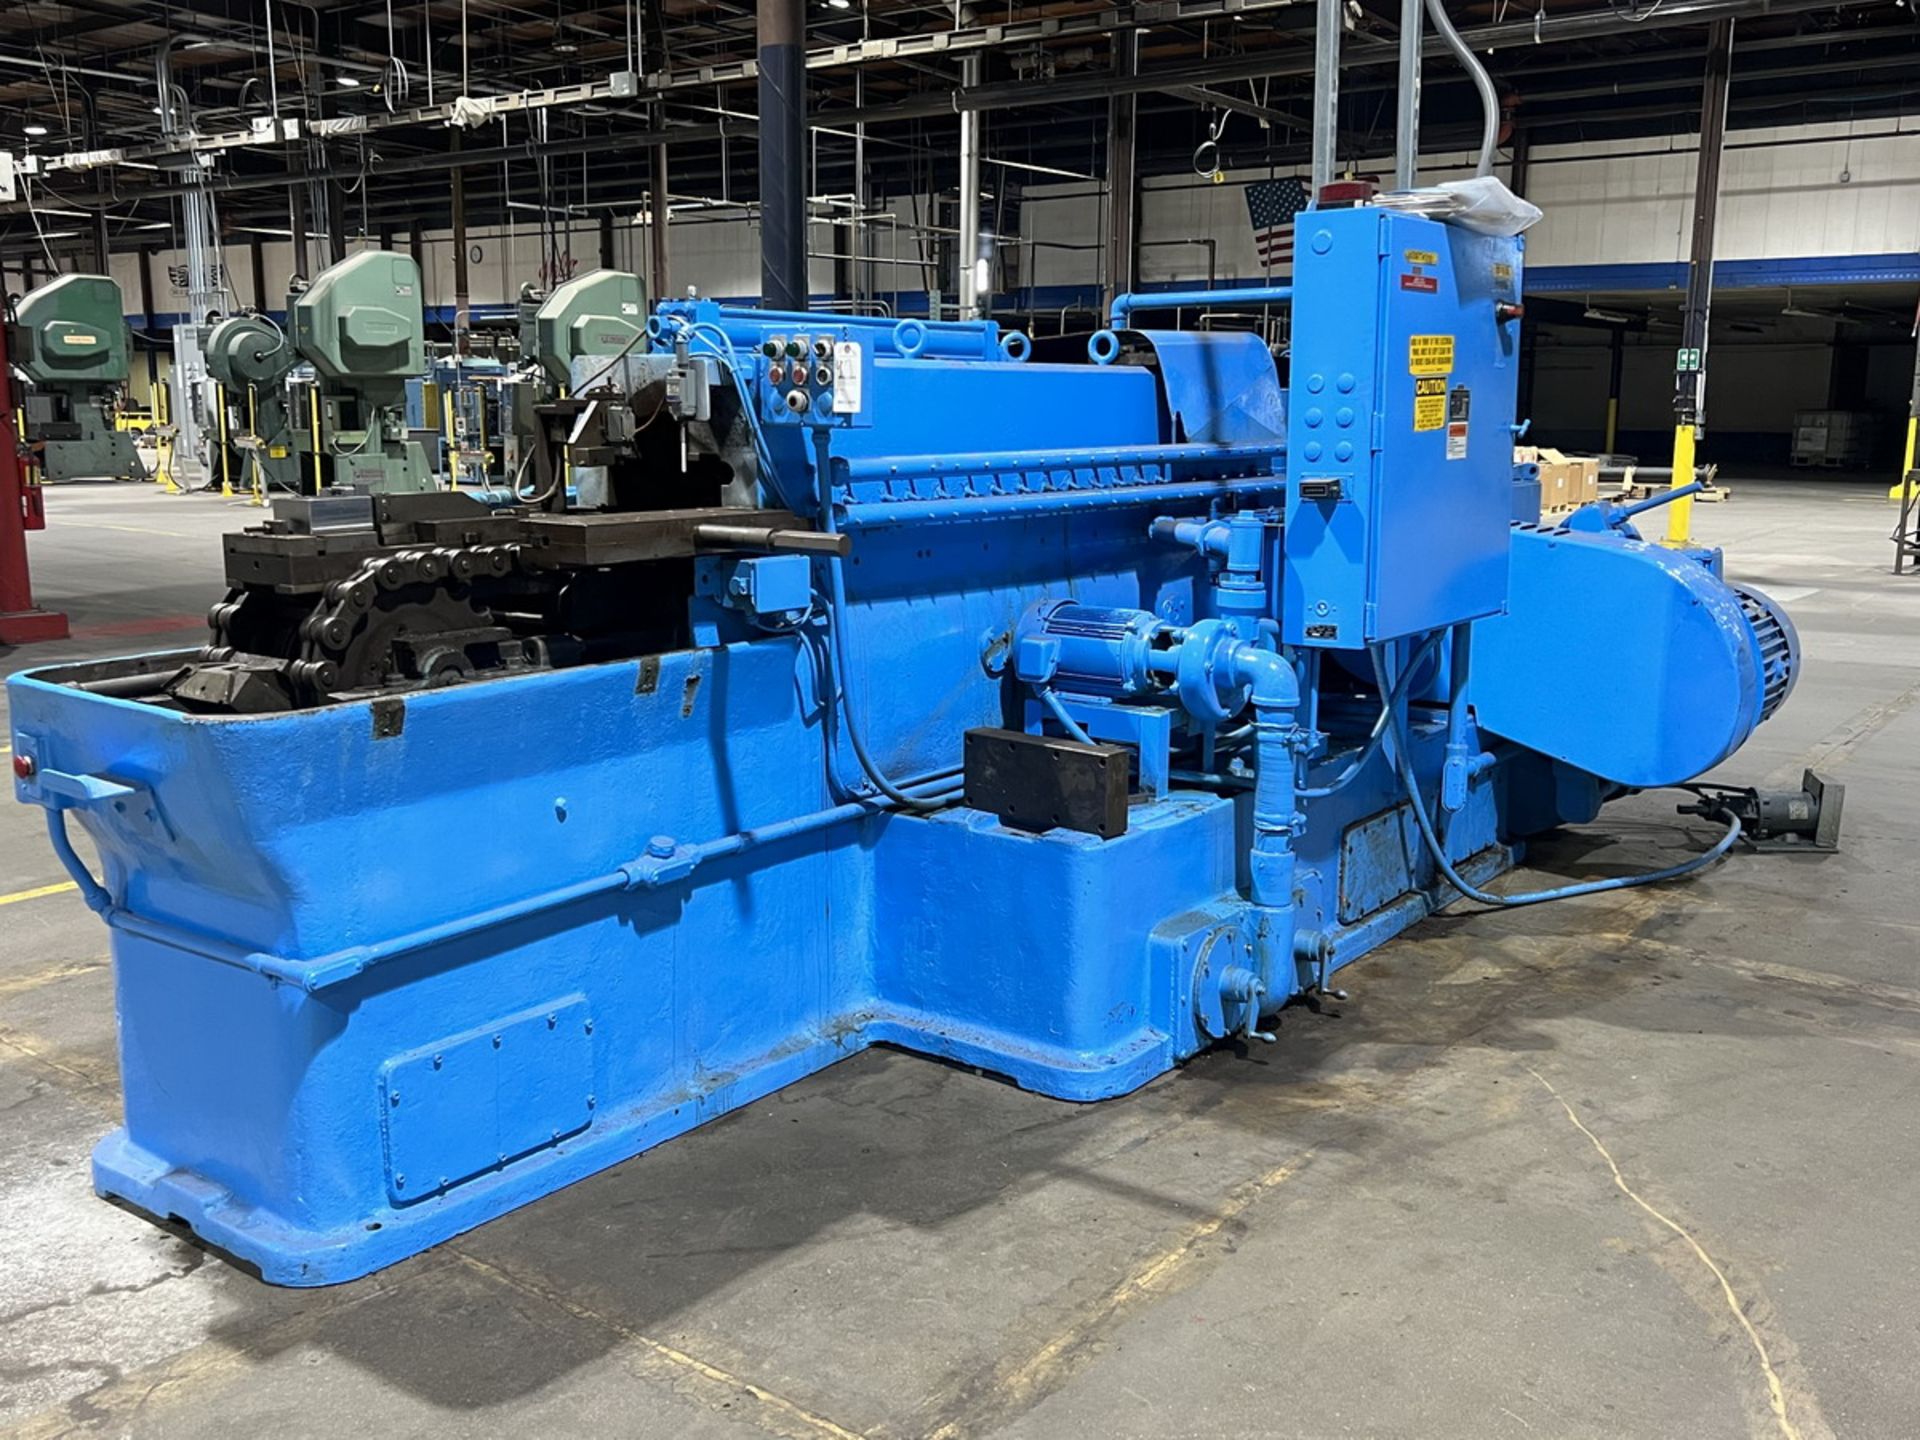 The Foote-Burt Co. No. 12-1/2-15-15L 15-Ton x 110" Horizontal Hydraulic Continuous Broaching Machine - Image 5 of 13